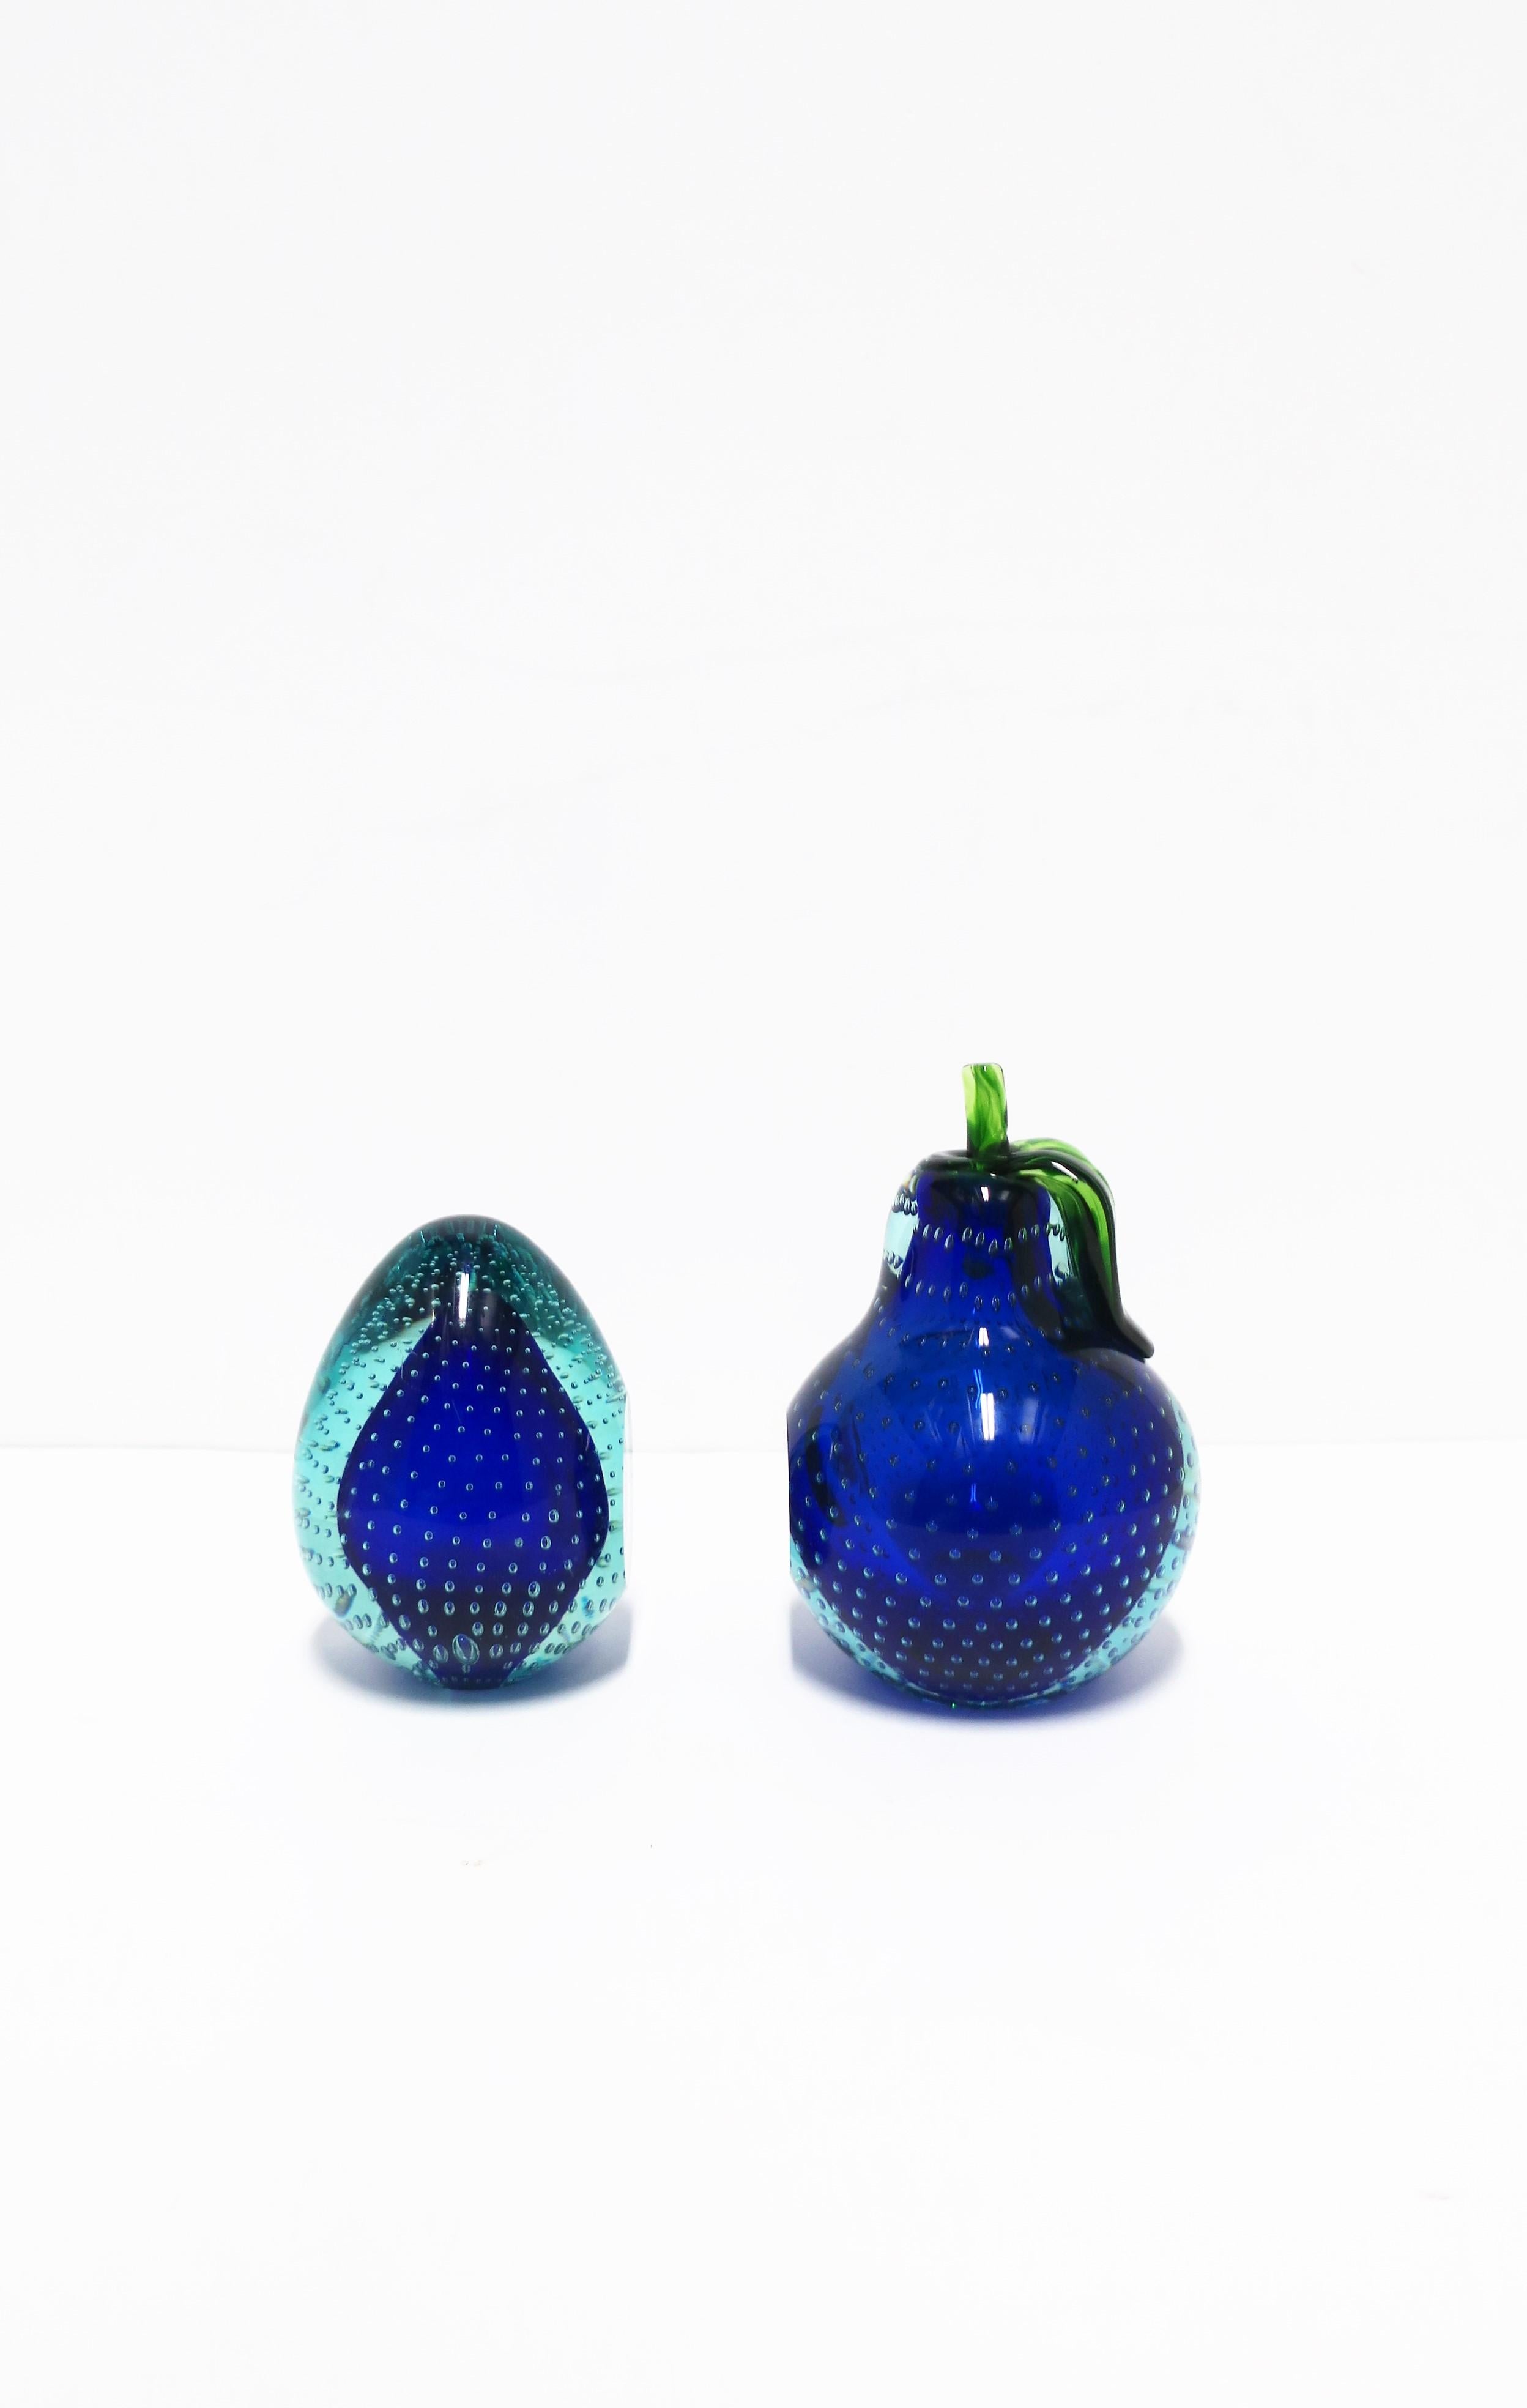 Italian Murano Blue Art Glass Pear Fruit Decorative Objects or Bookends In Good Condition For Sale In New York, NY